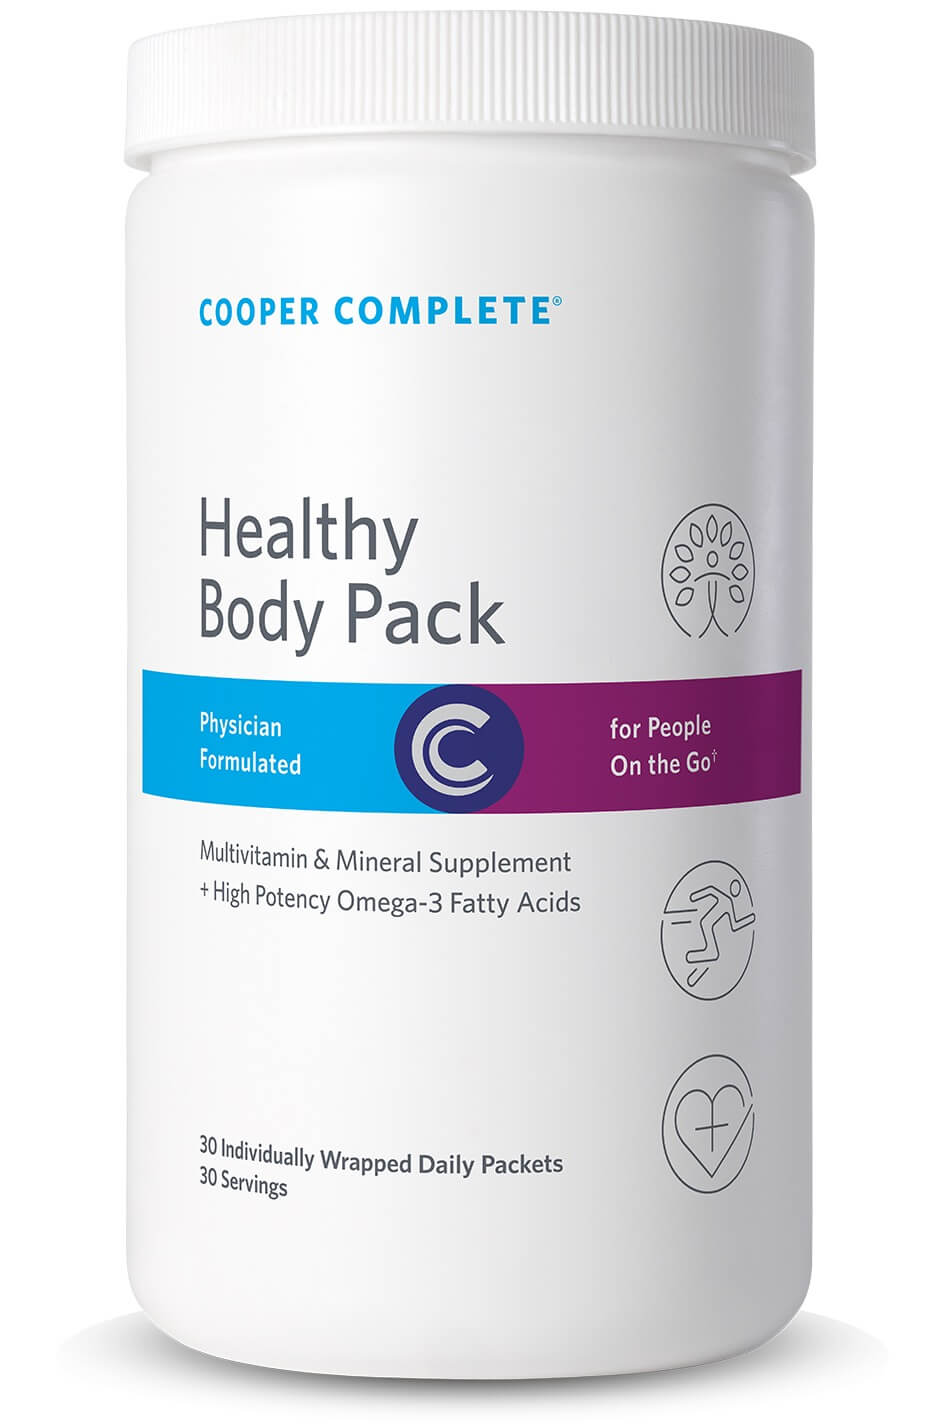 Photo of Cooper Complete Healthy Body Daily Vitamin Pack Supplement canister